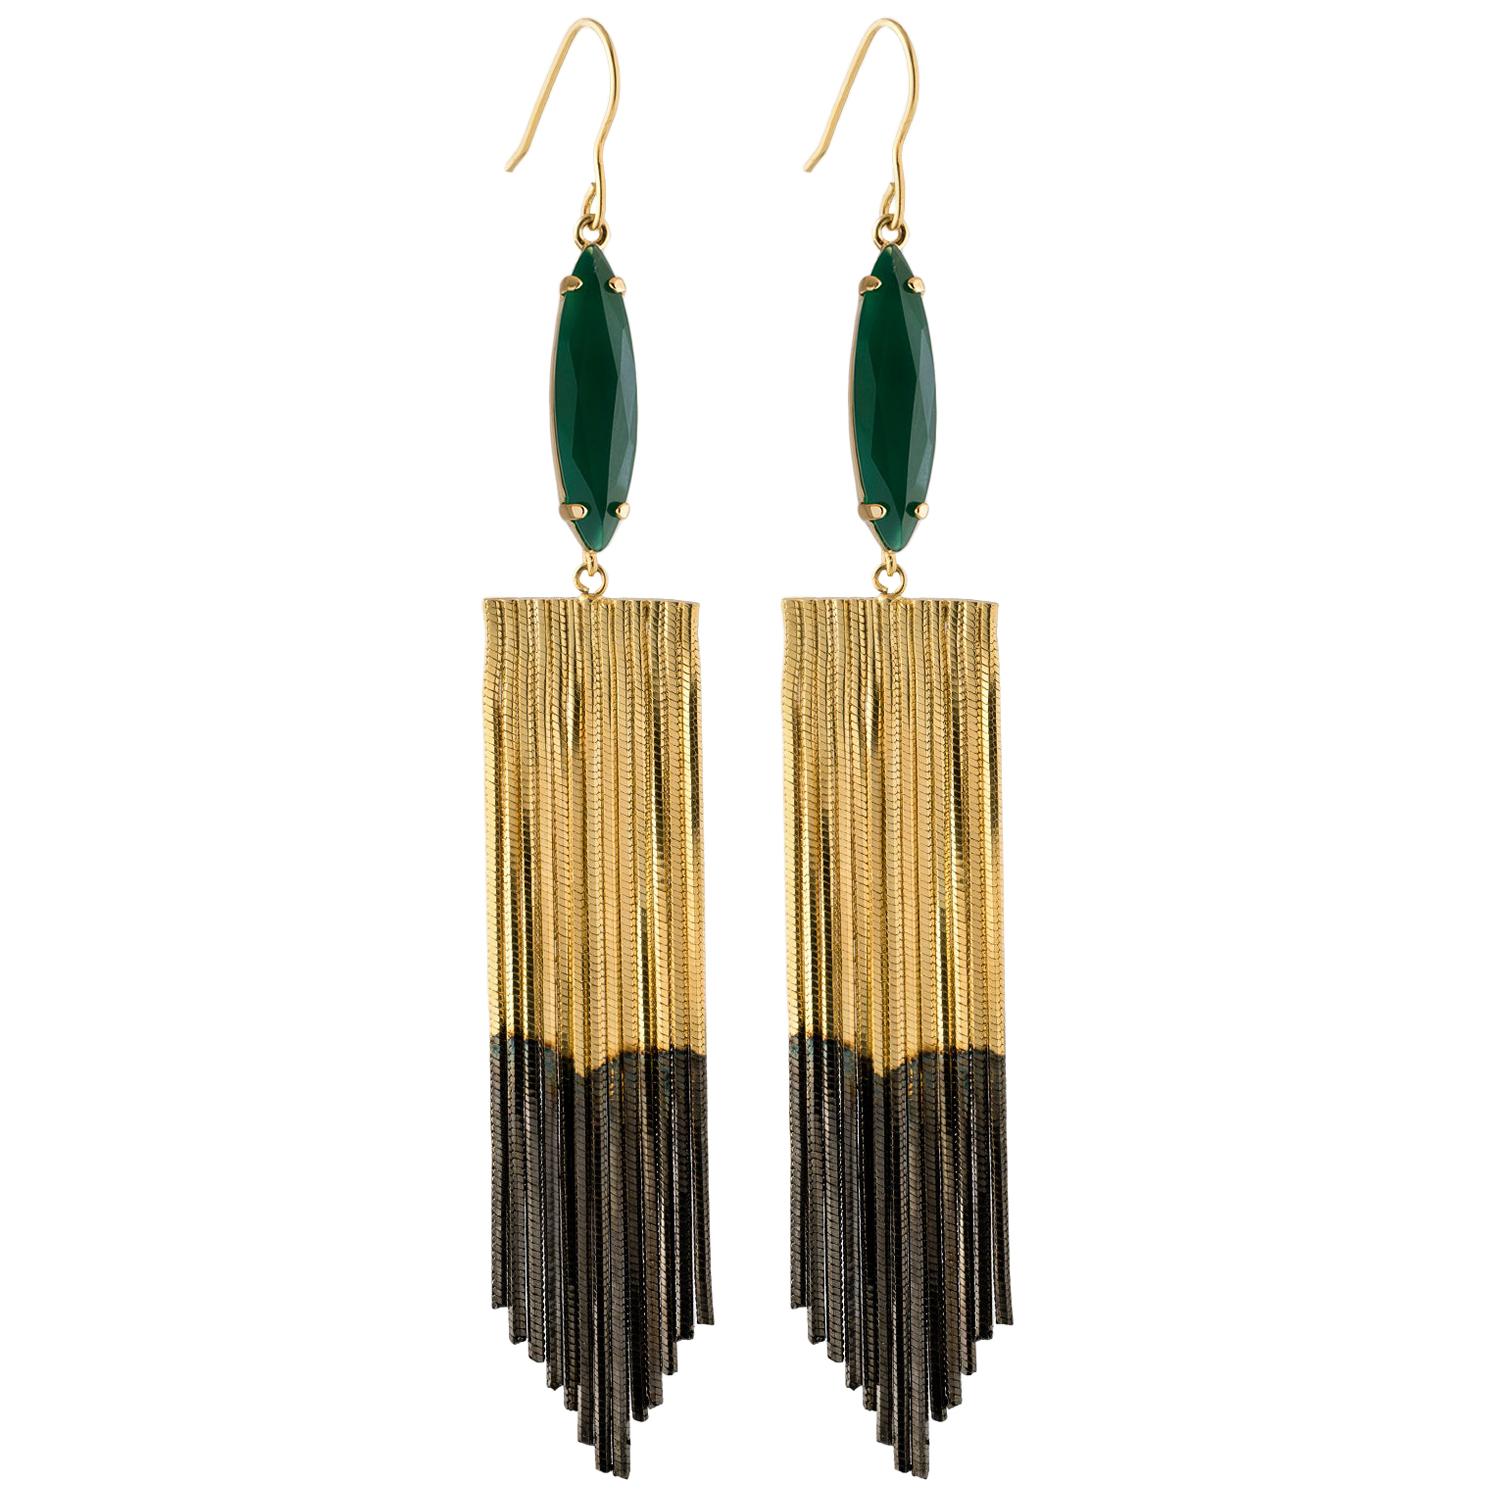 18 Carat Two Tones Gold Plated Fringed Earrings, Agate Navettes from IOSSELLIANI For Sale